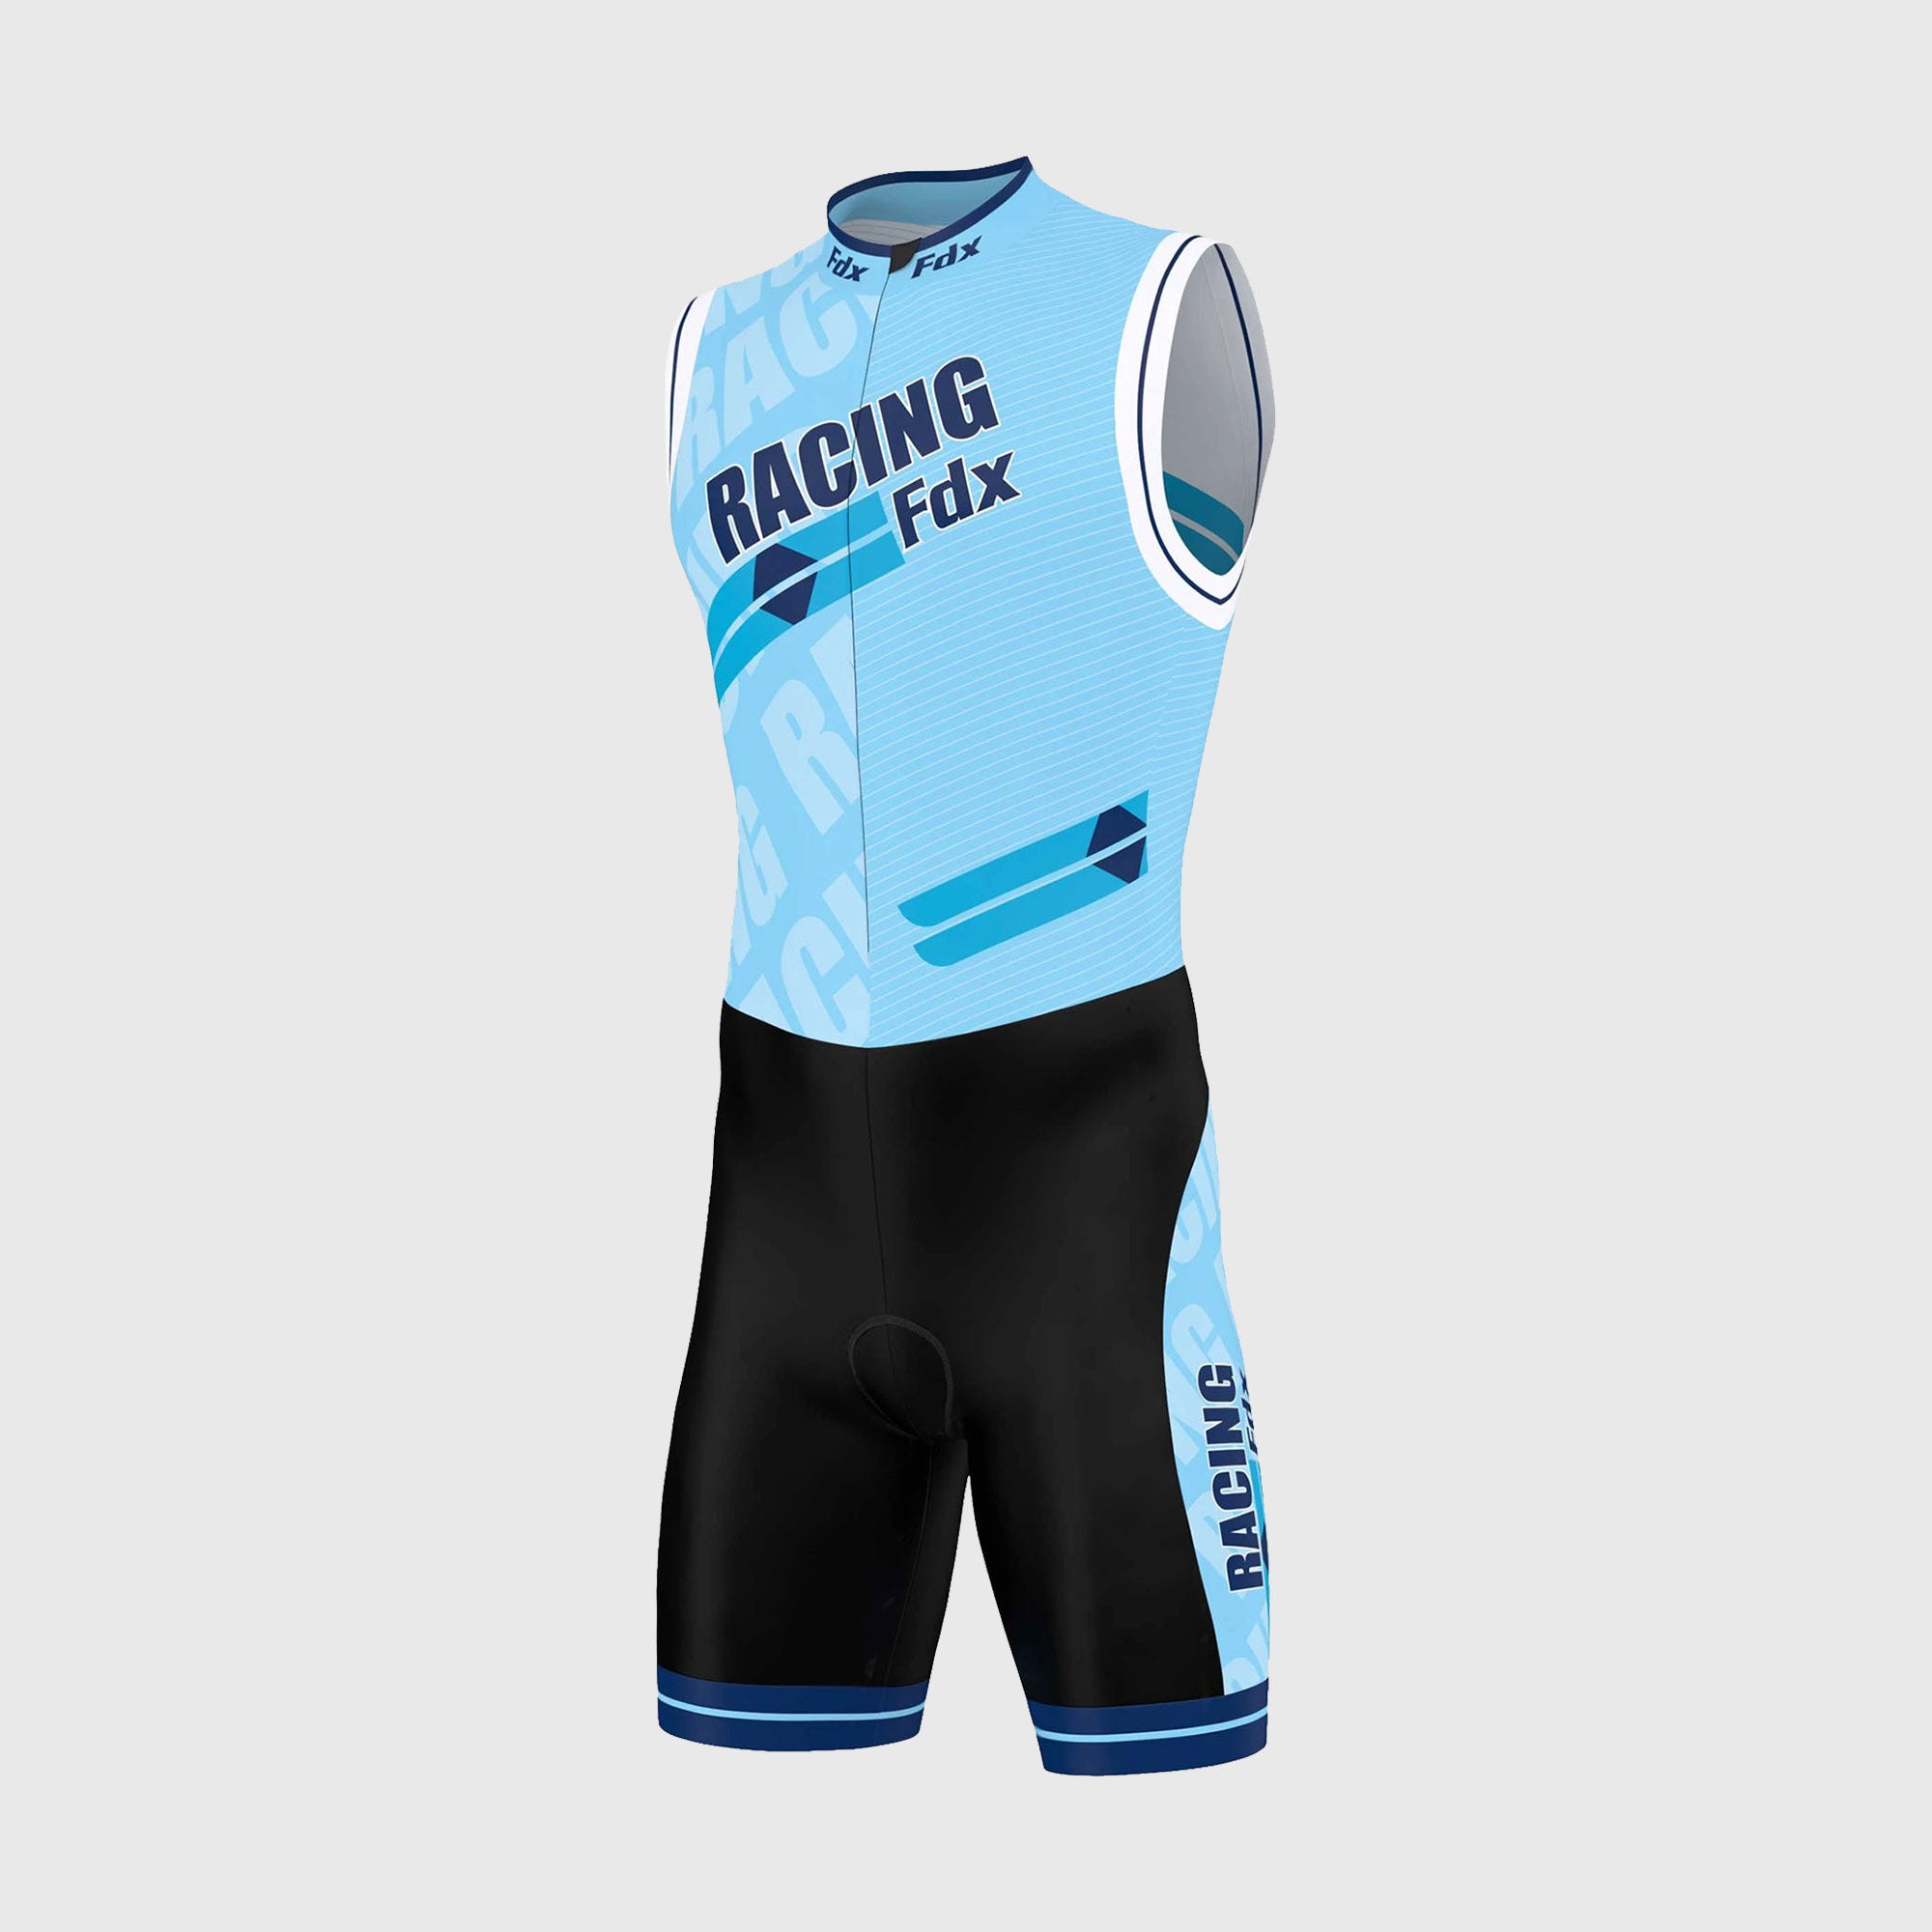 Men's and Women's Sleeveless Tri Skin Suit - DNA Cycling